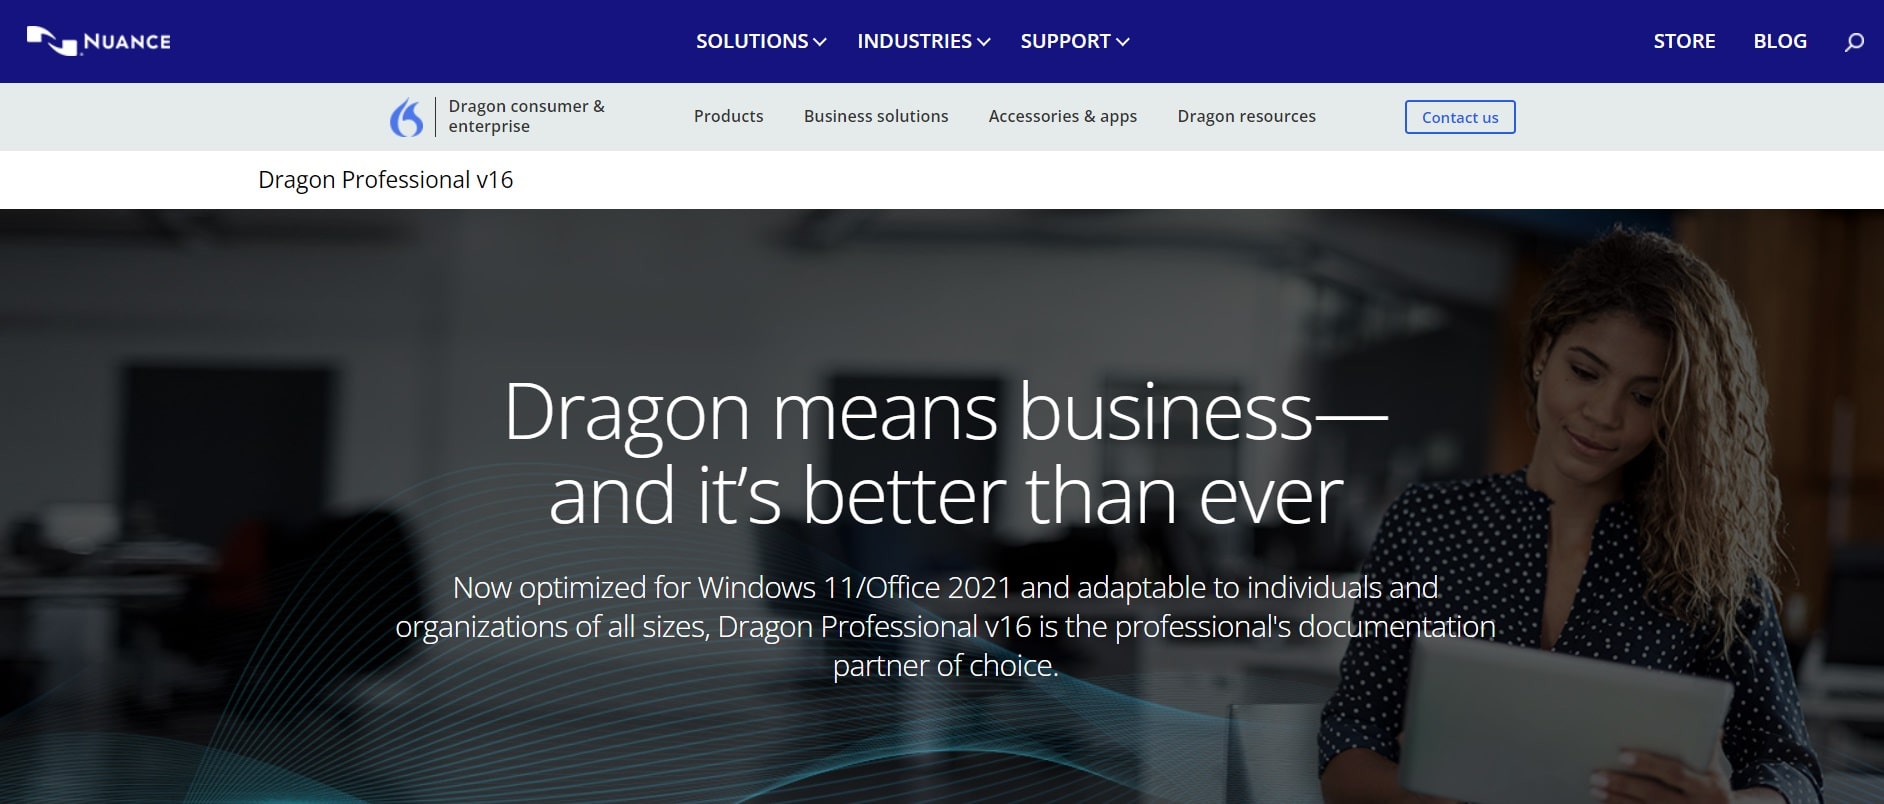 voice recognition software dragon professional